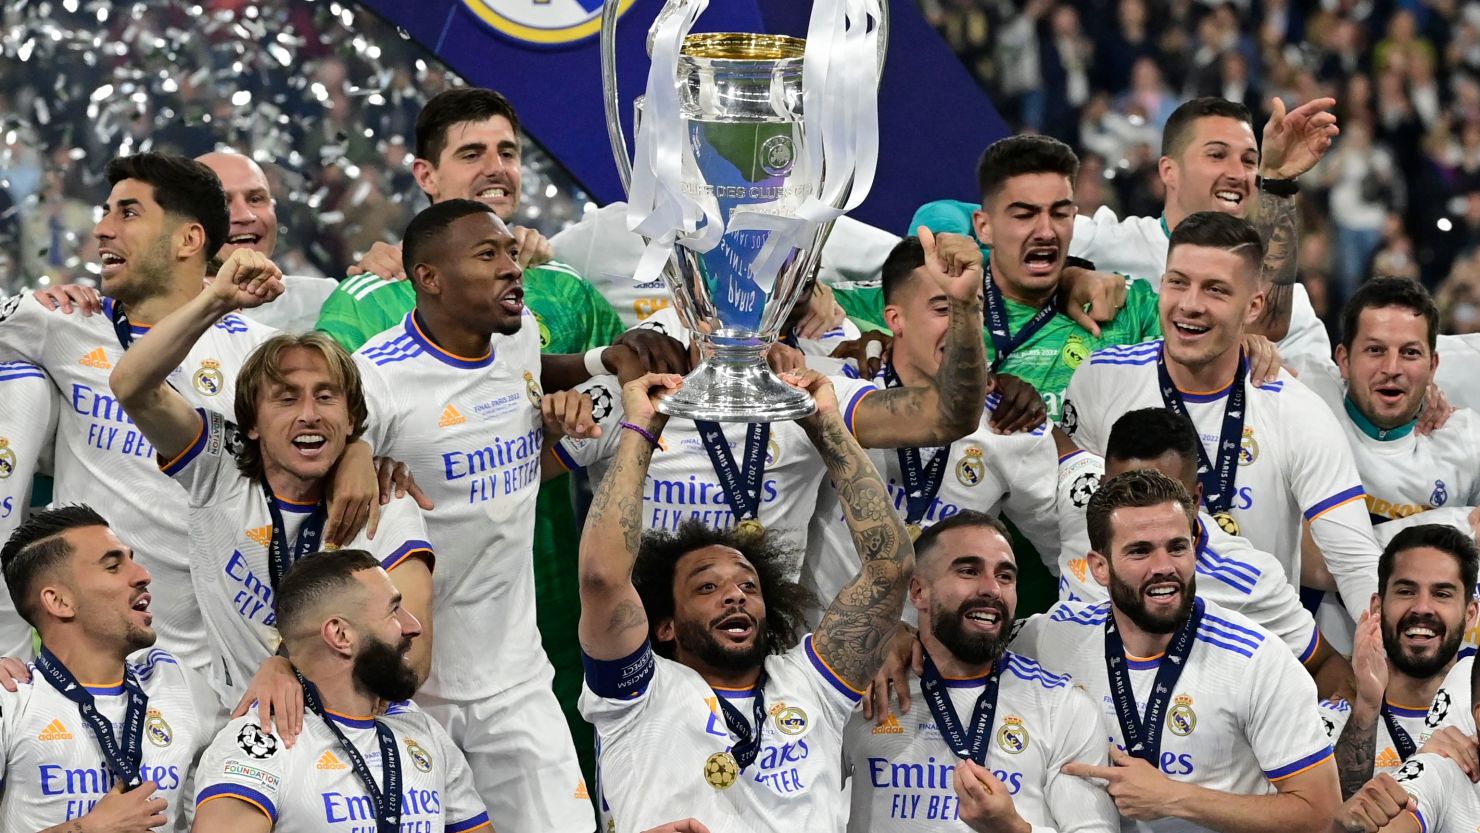 Real Madrid celebrates lifting its 14th European Cup in Paris in May after beating Liverpool 1-0 in the final.